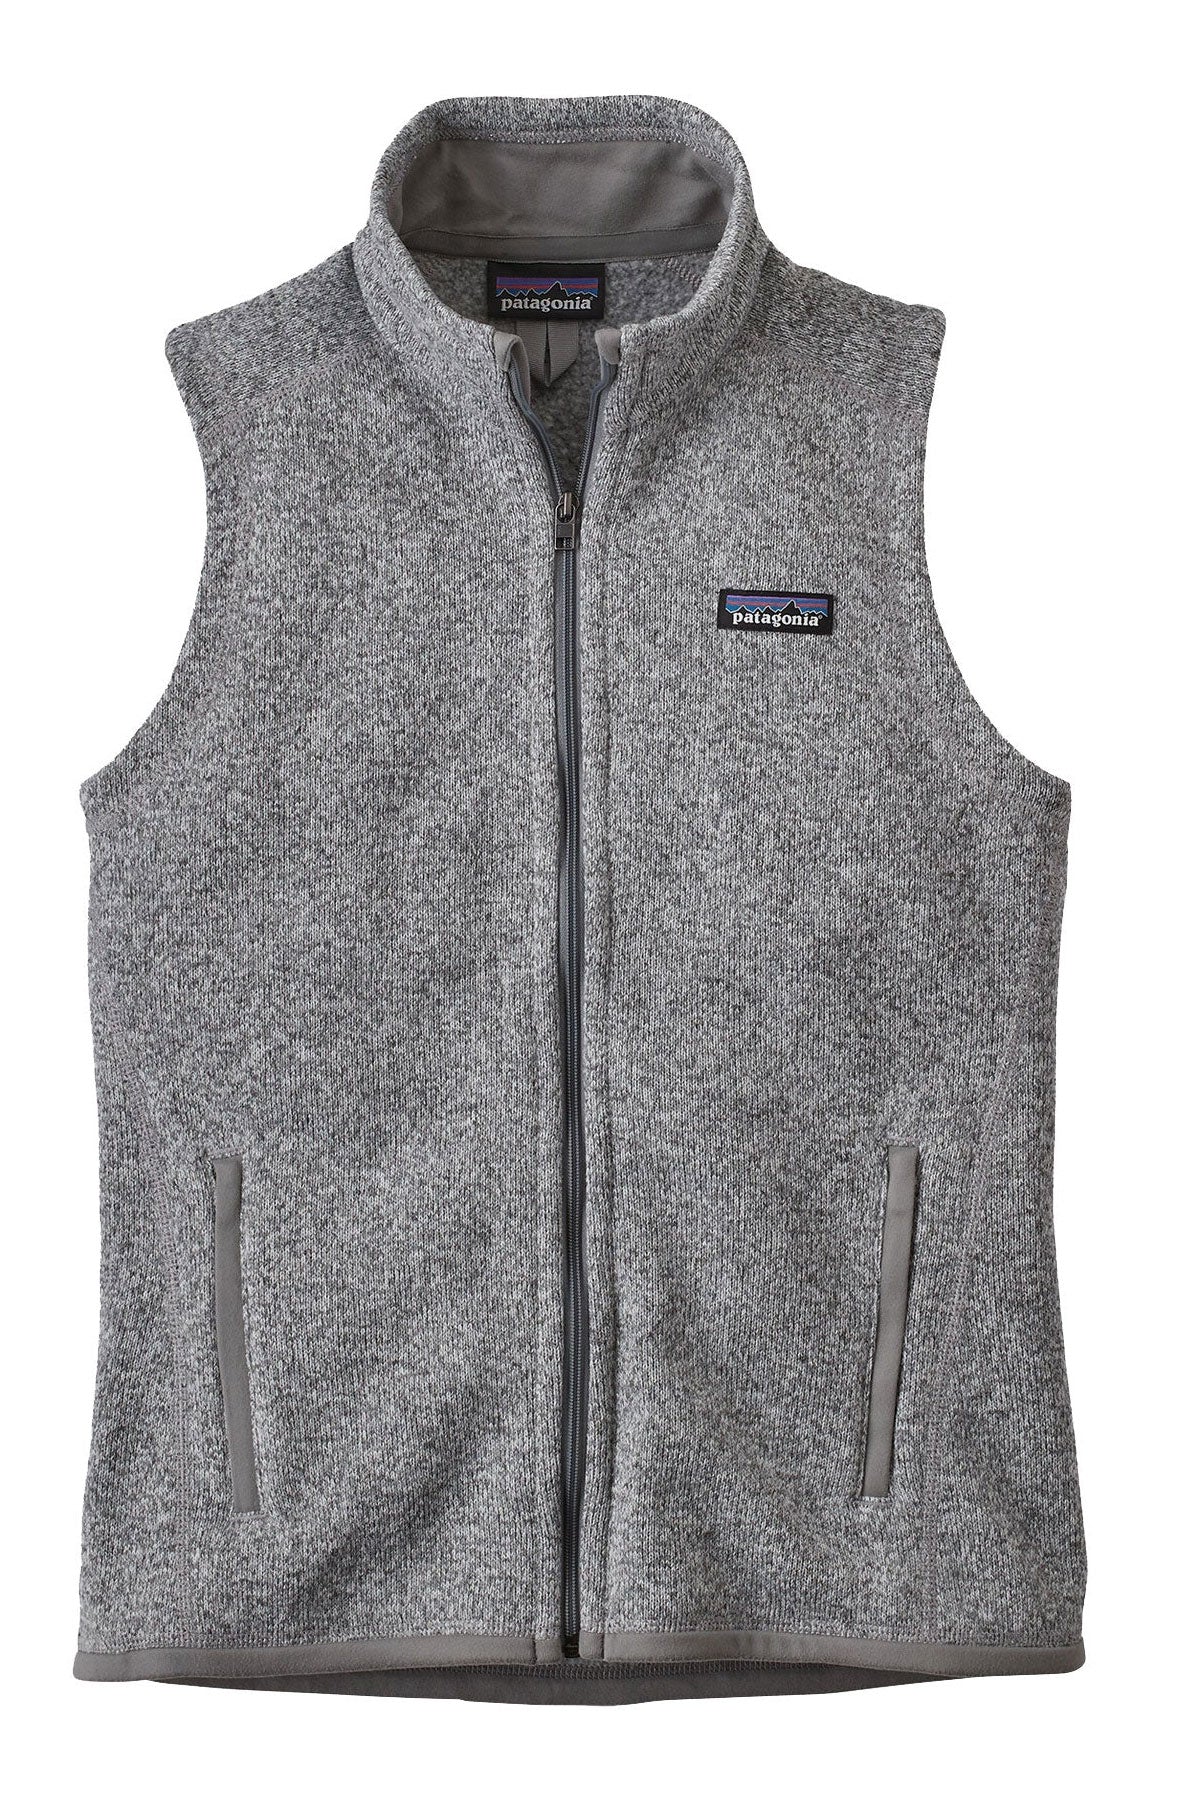 Patagonia Womens Better Sweater Fleece Customized Vests, Birch White